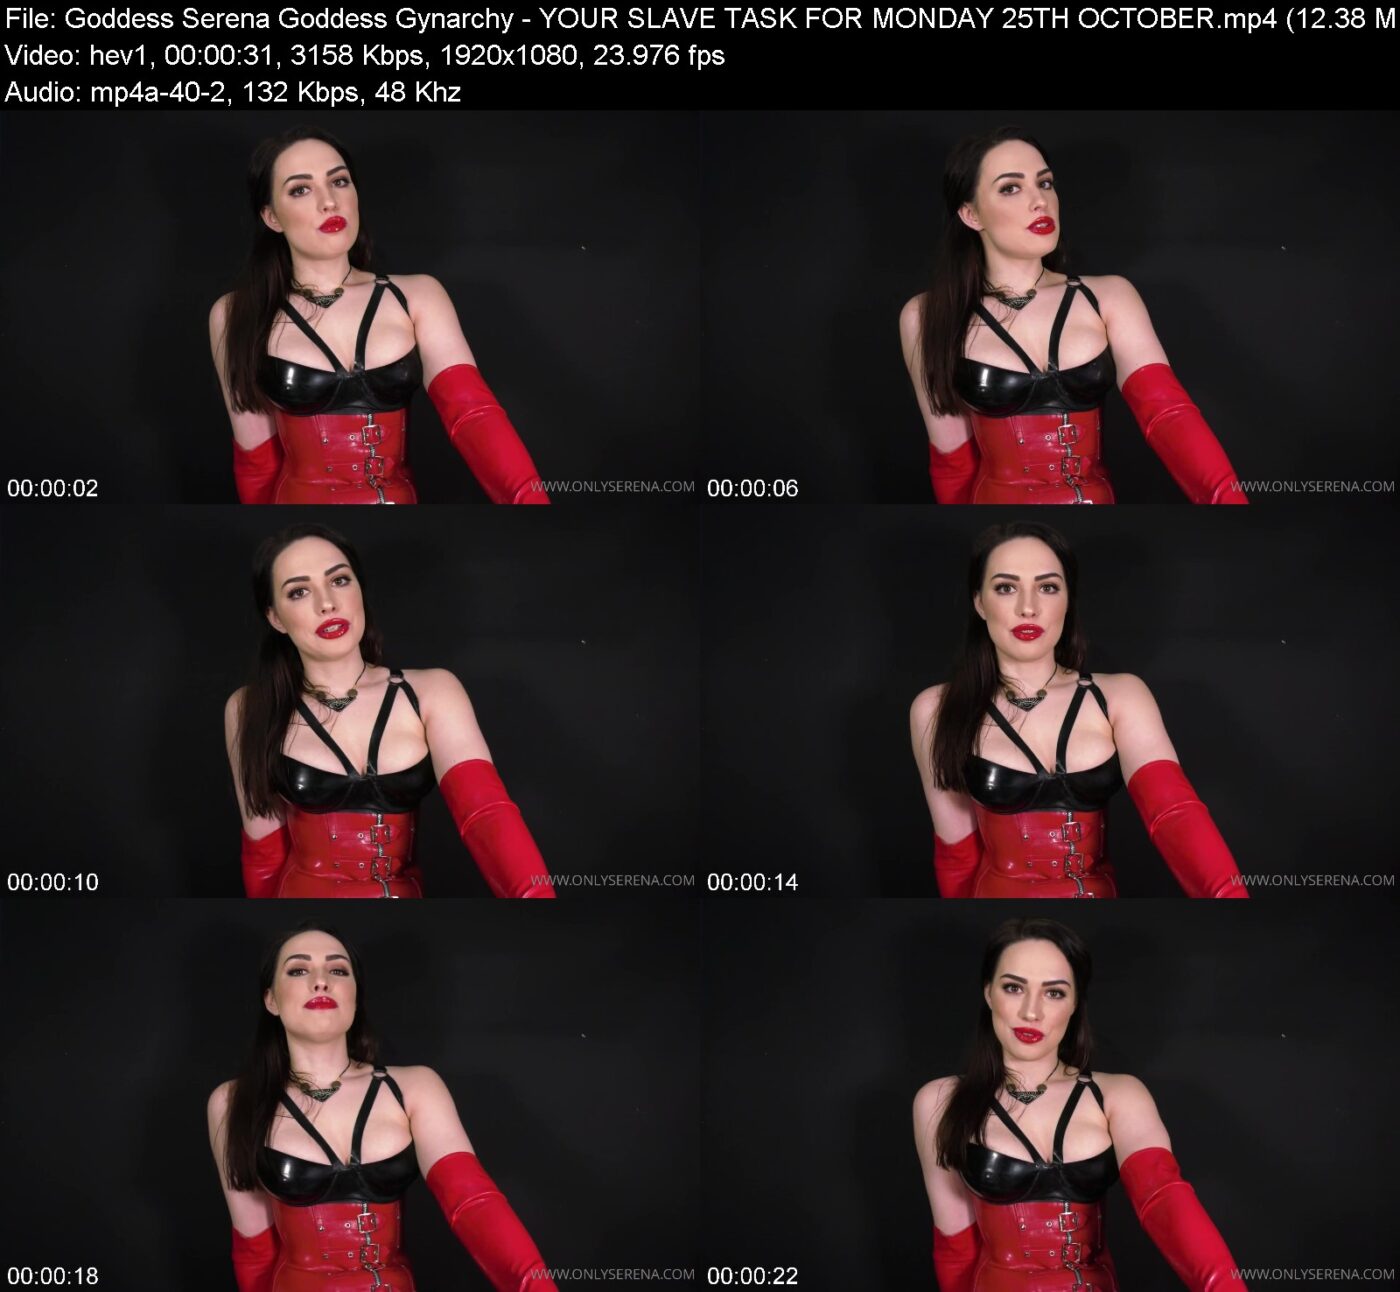 Actress: Goddess Serena Goddess Gynarchy. Title and Studio: YOUR SLAVE TASK FOR MONDAY 25TH OCTOBER